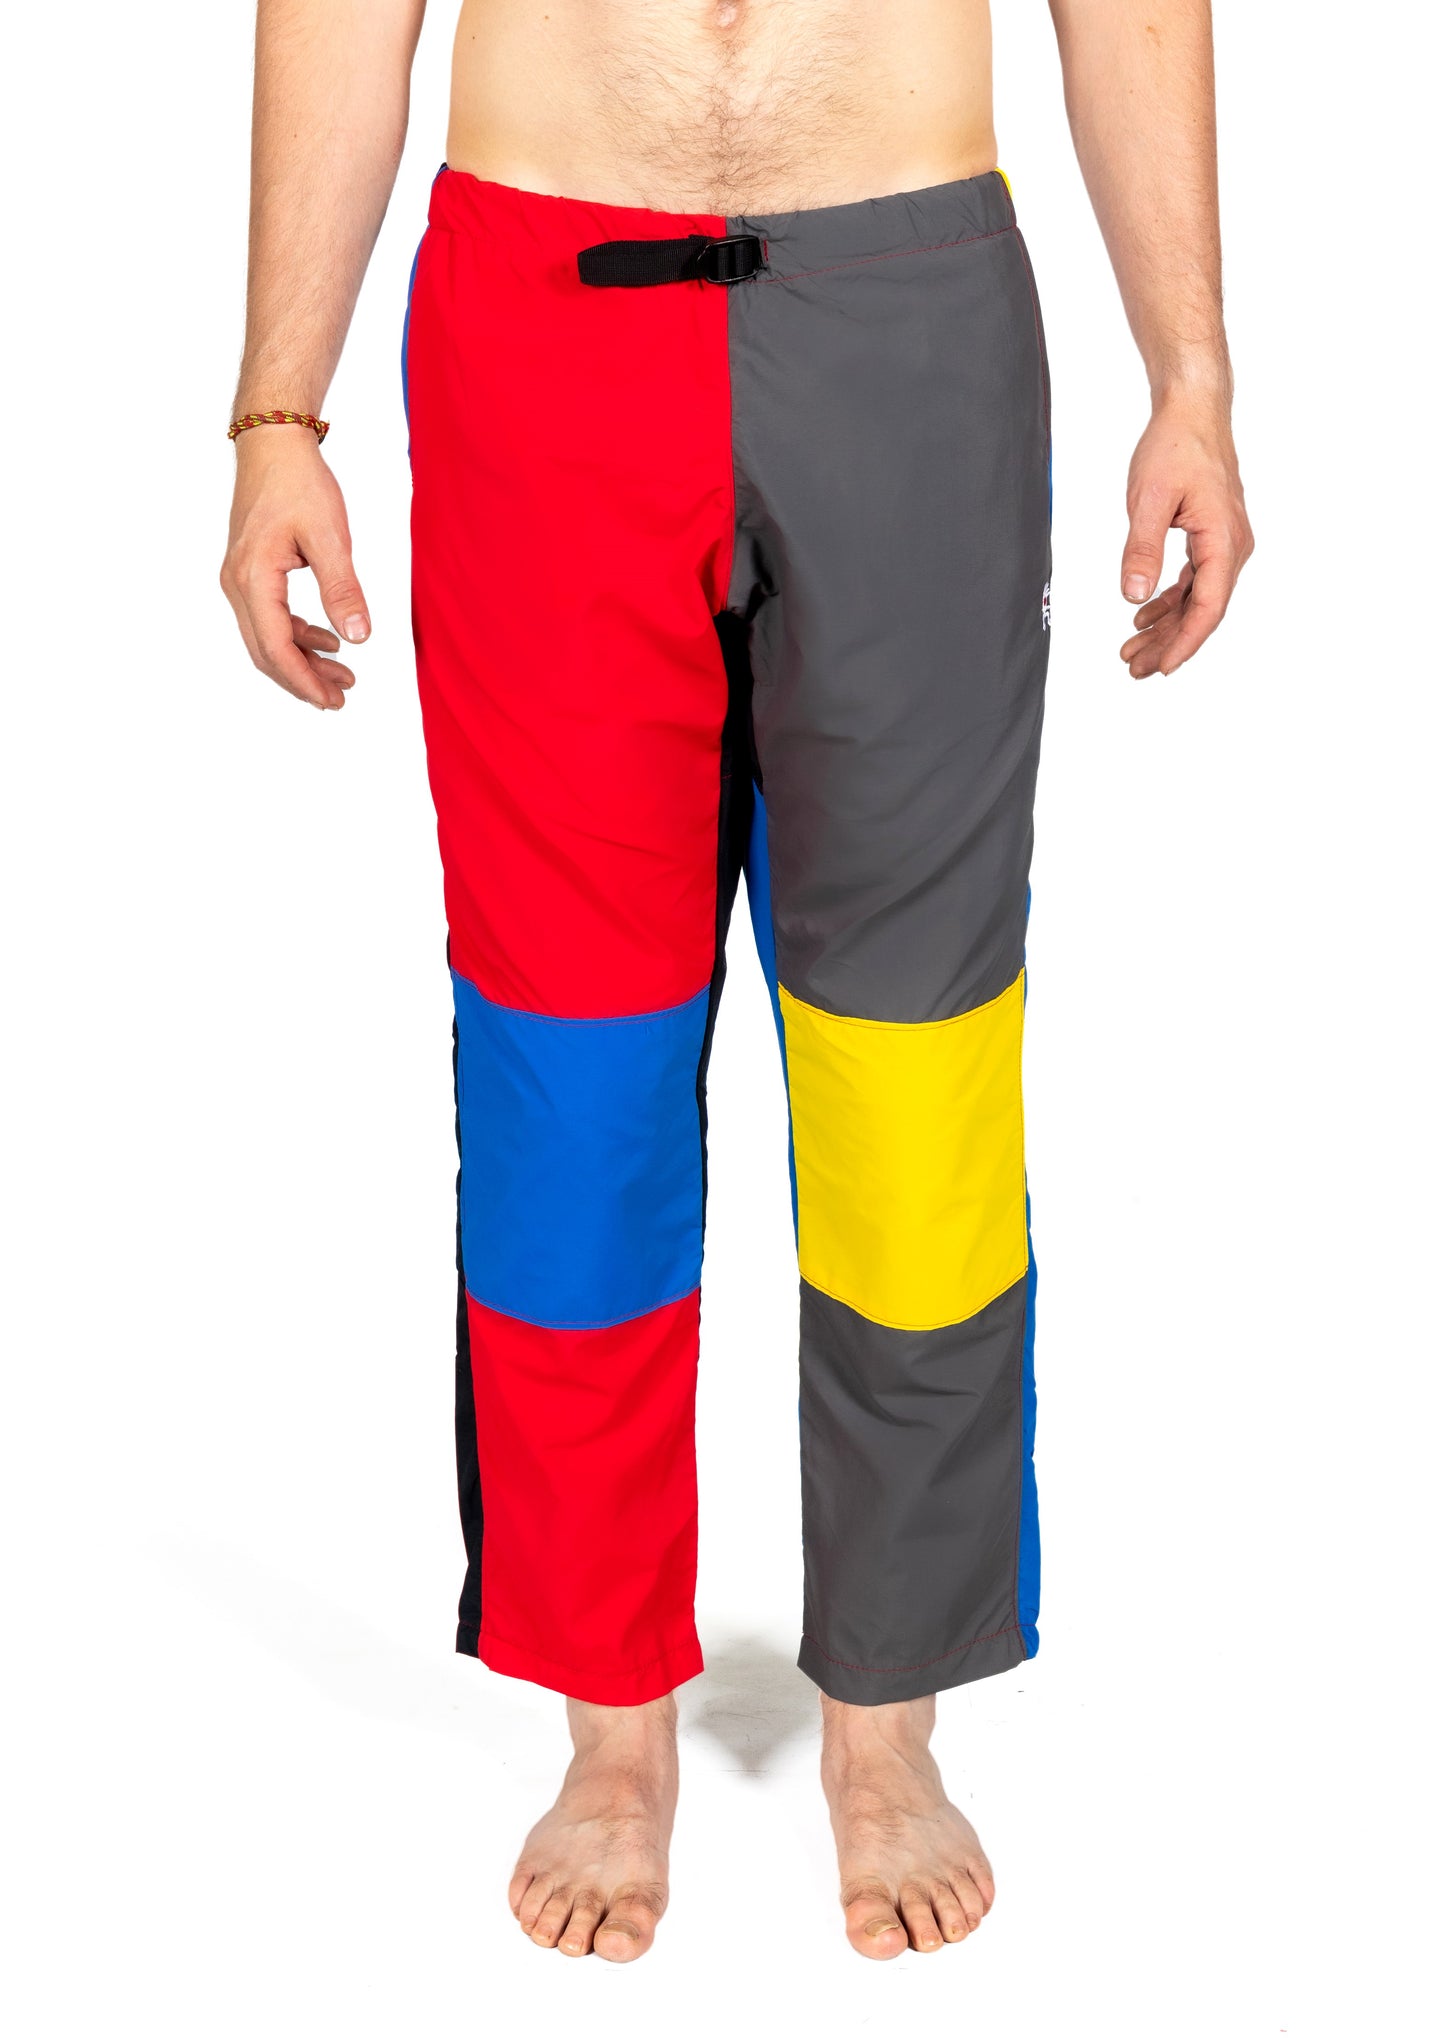 Jester Trousers